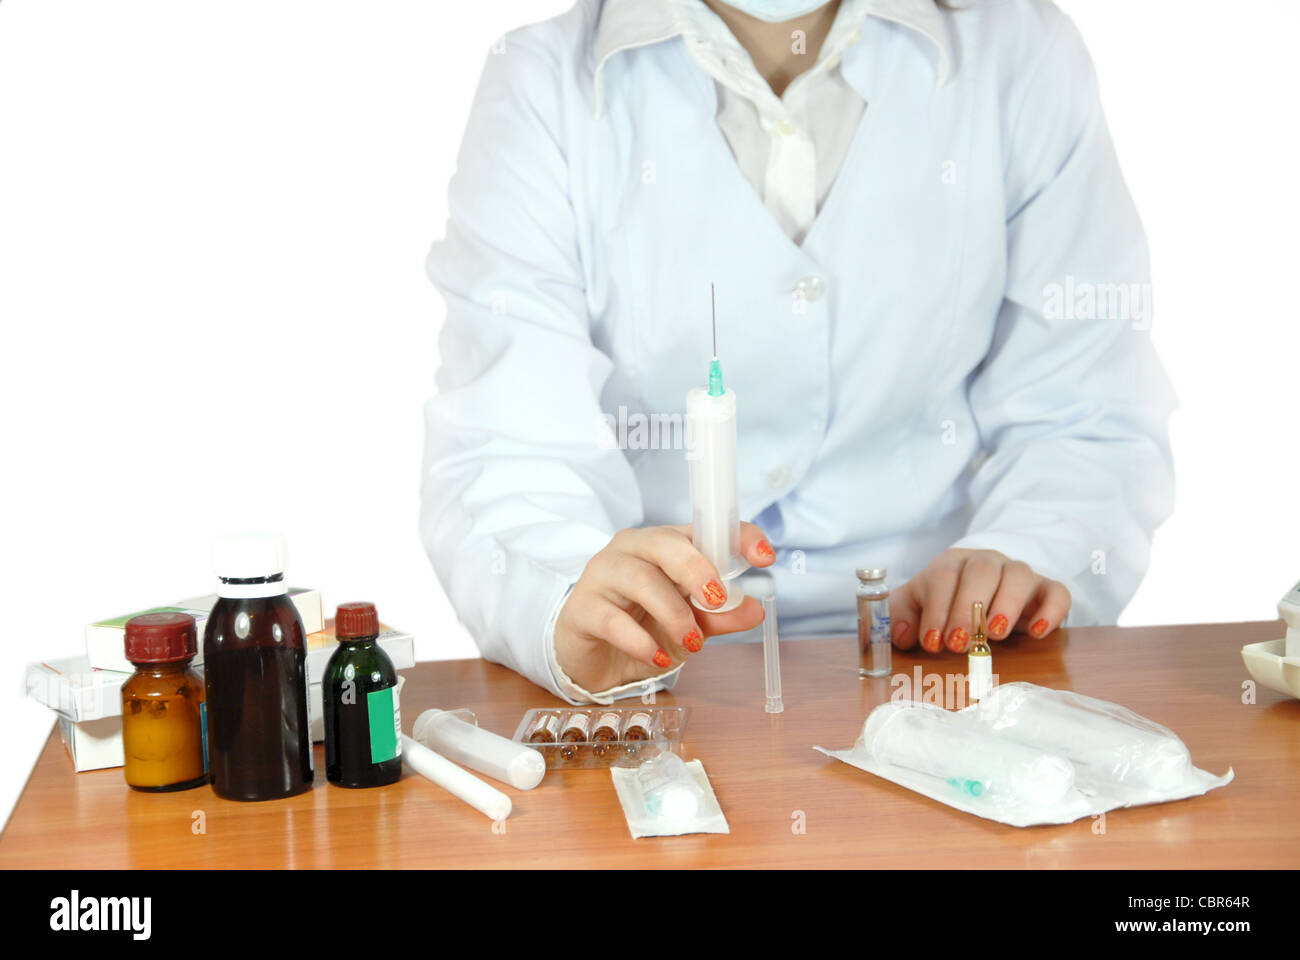 young doctor learns to do injections on personal experience Stock Photo